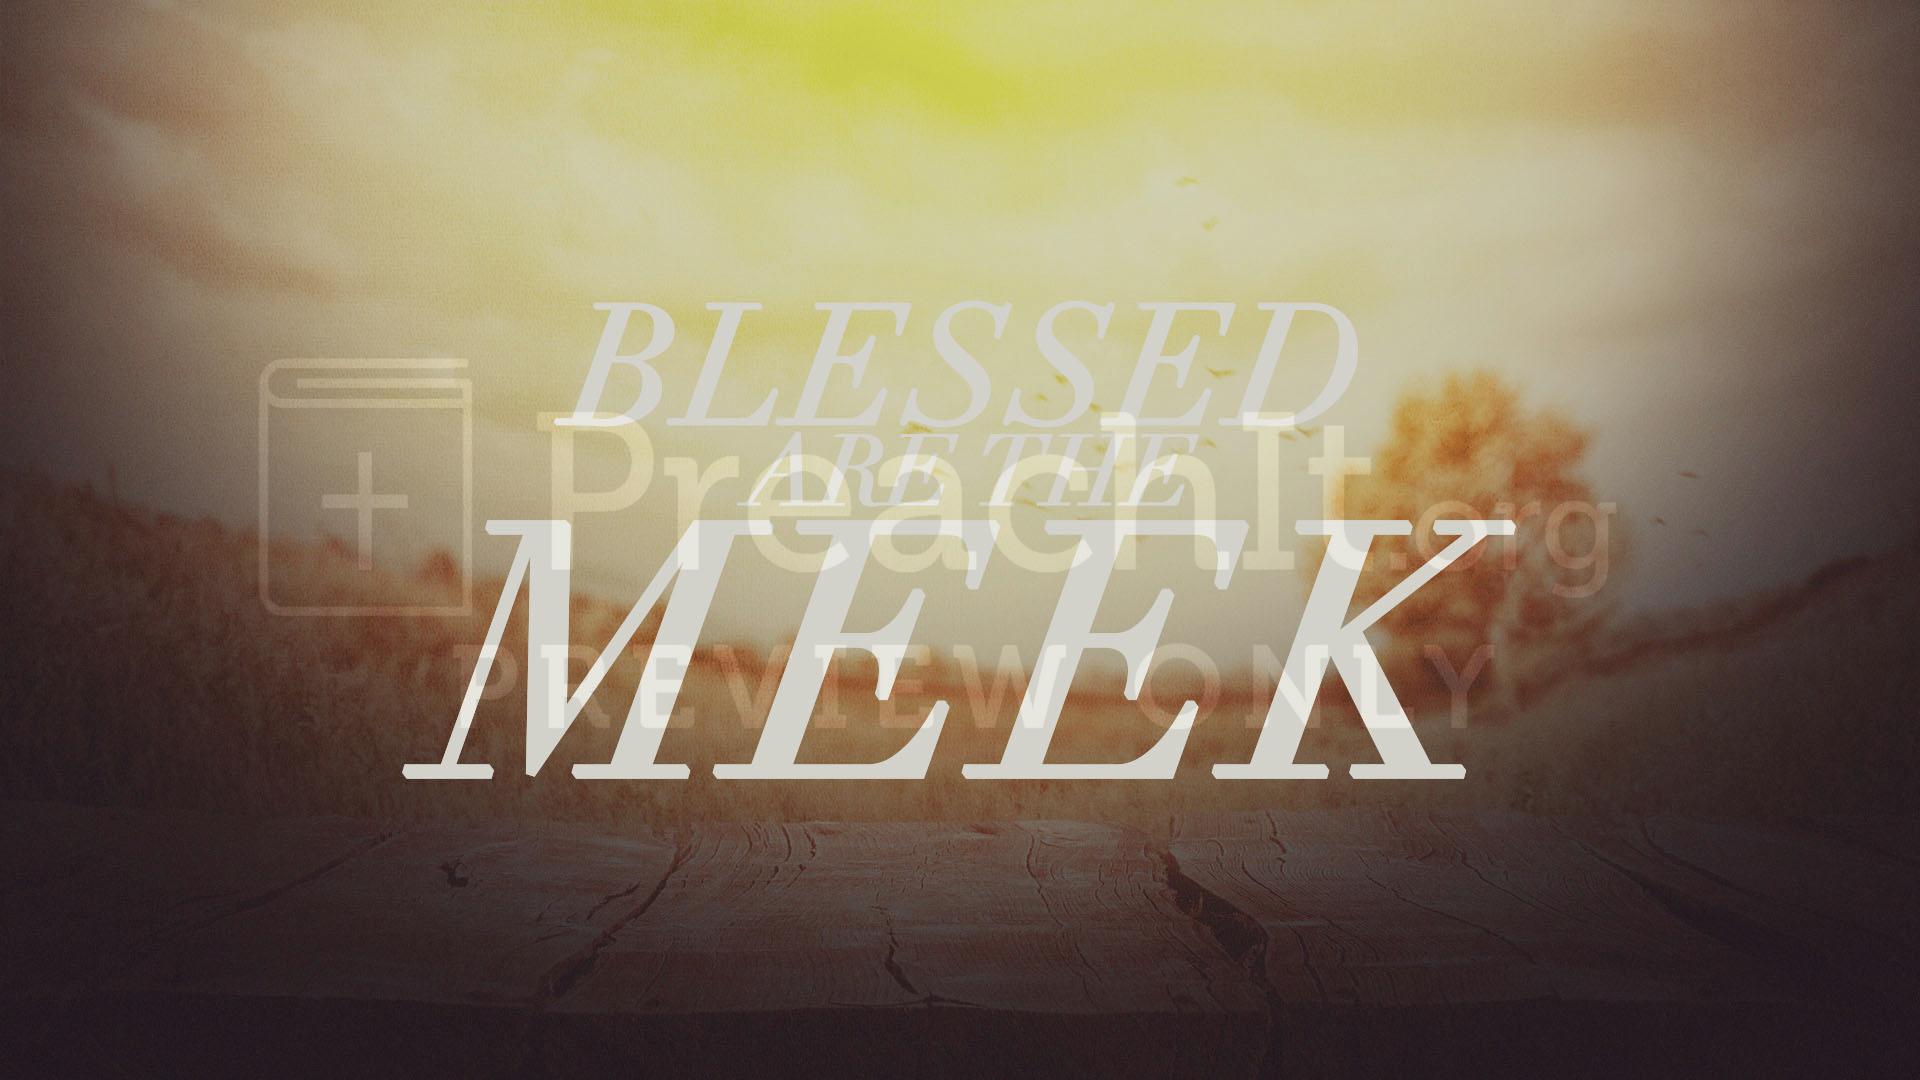 Lesson 2: Blessed Are The Meek